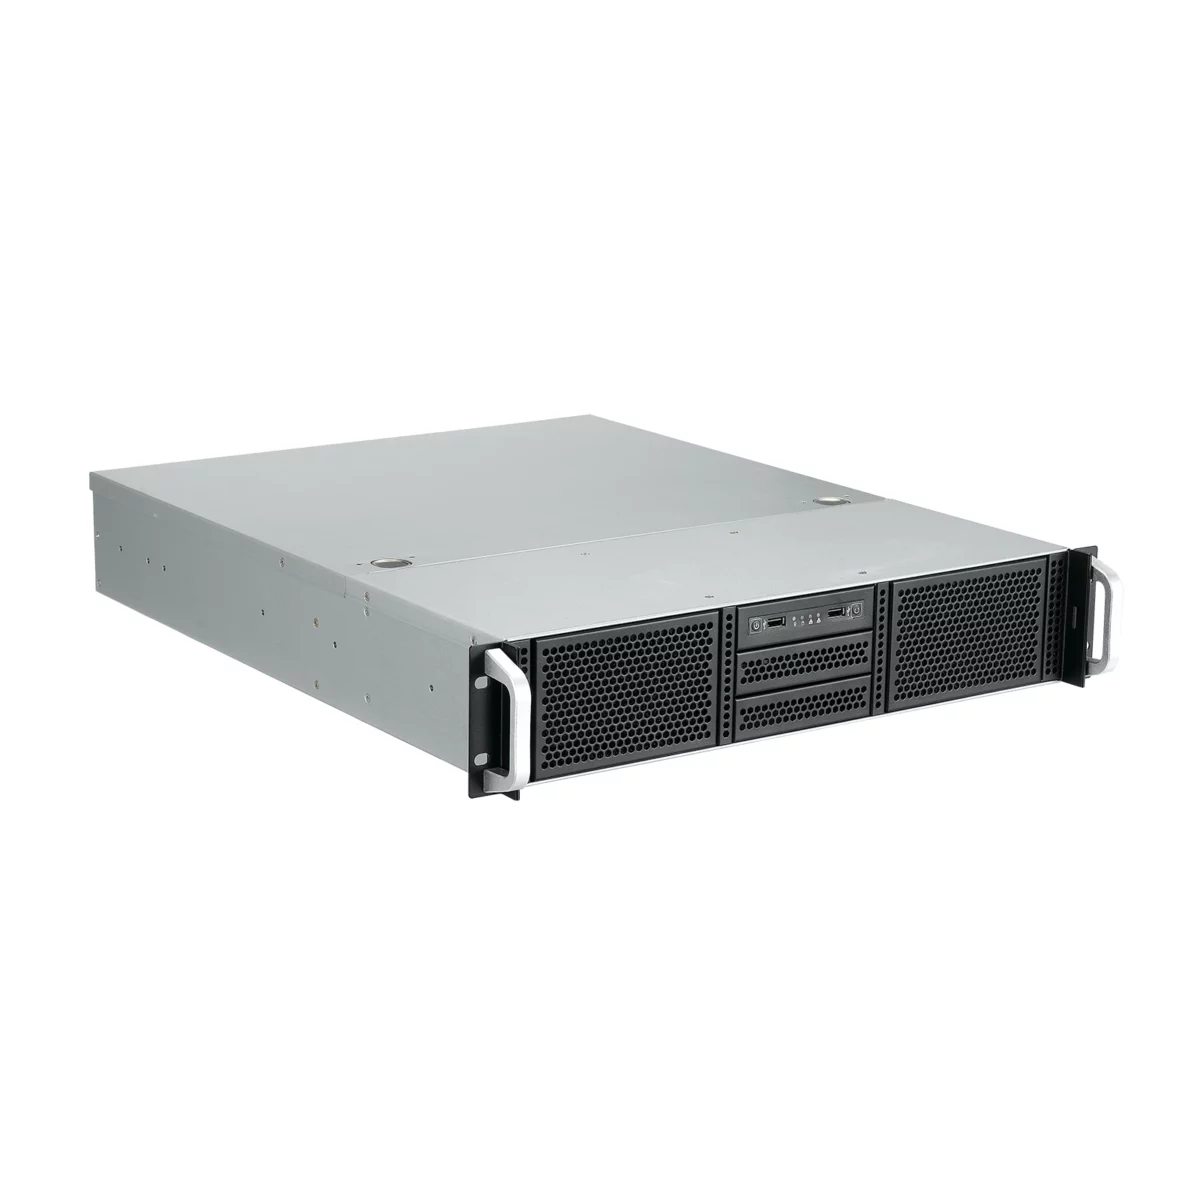 rackmount chassis OC2550-Y Side view